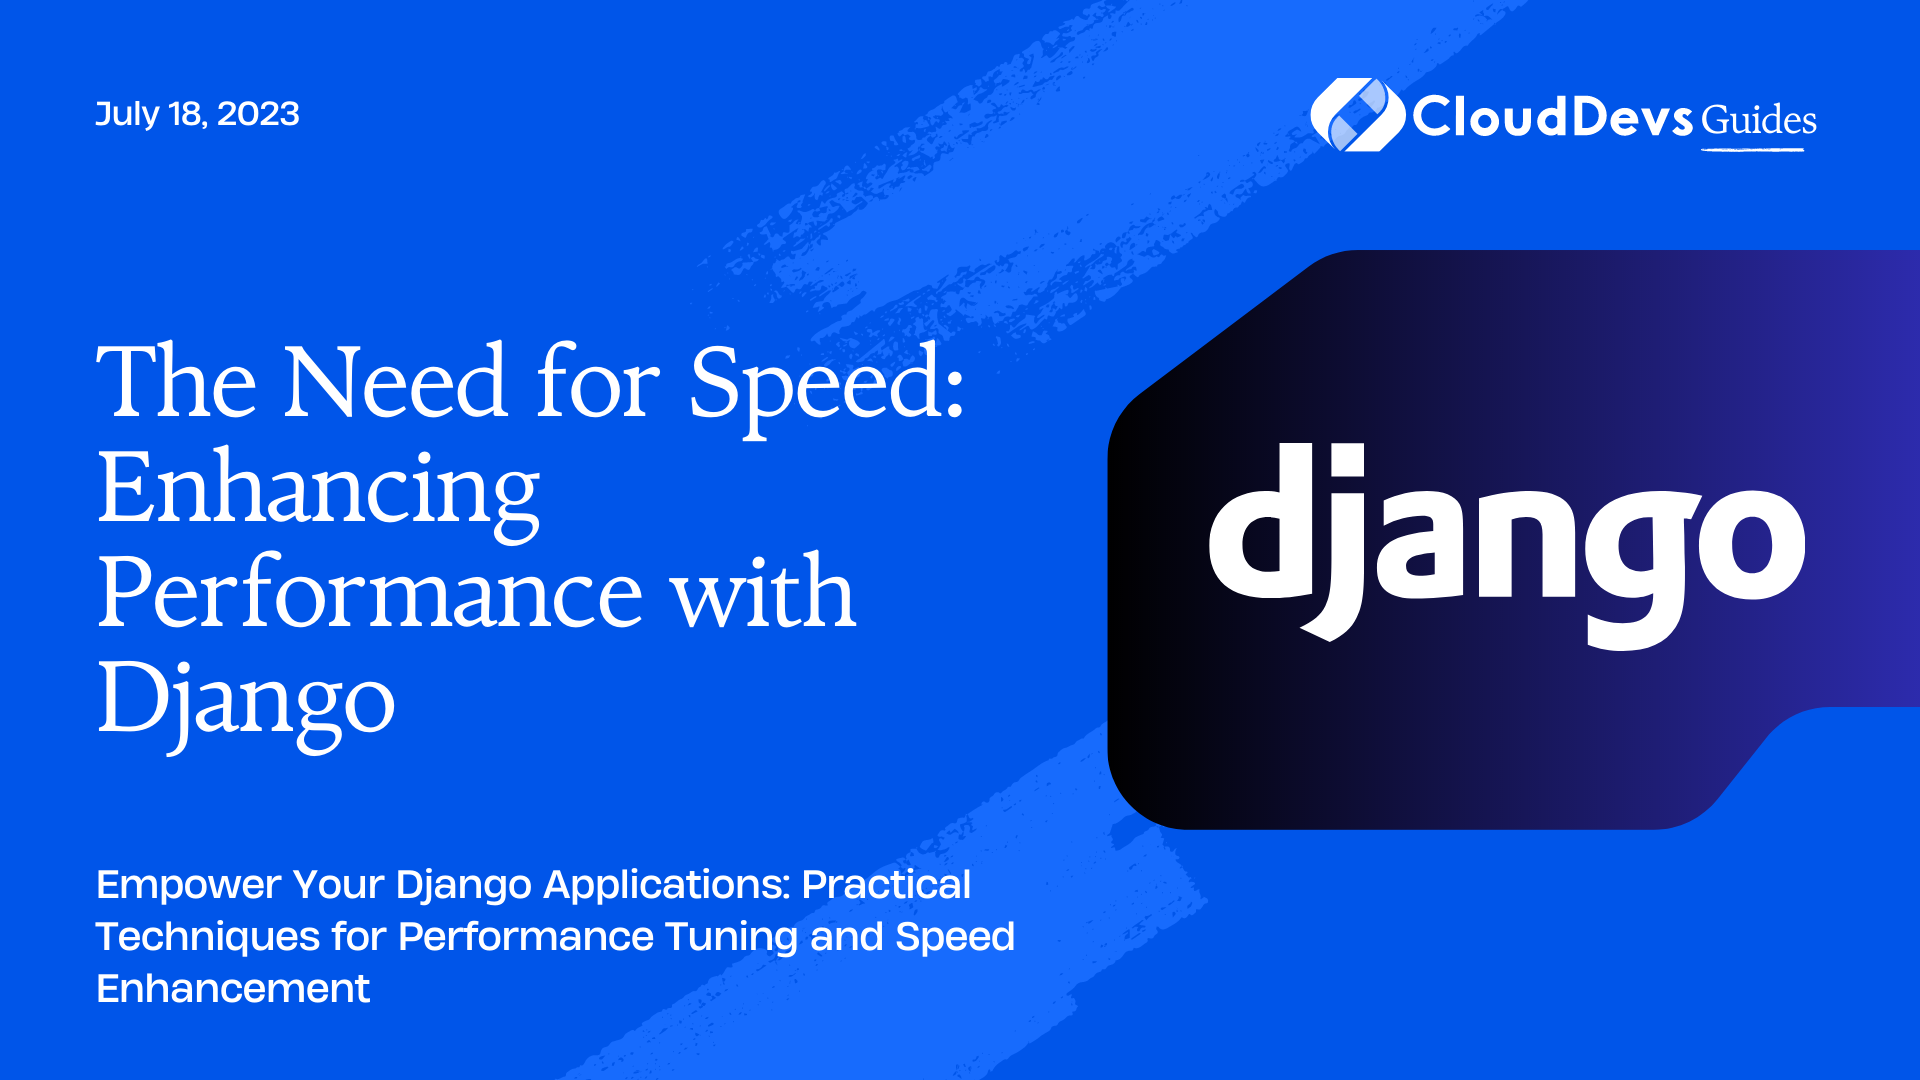 The Need for Speed: Enhancing Performance with Django